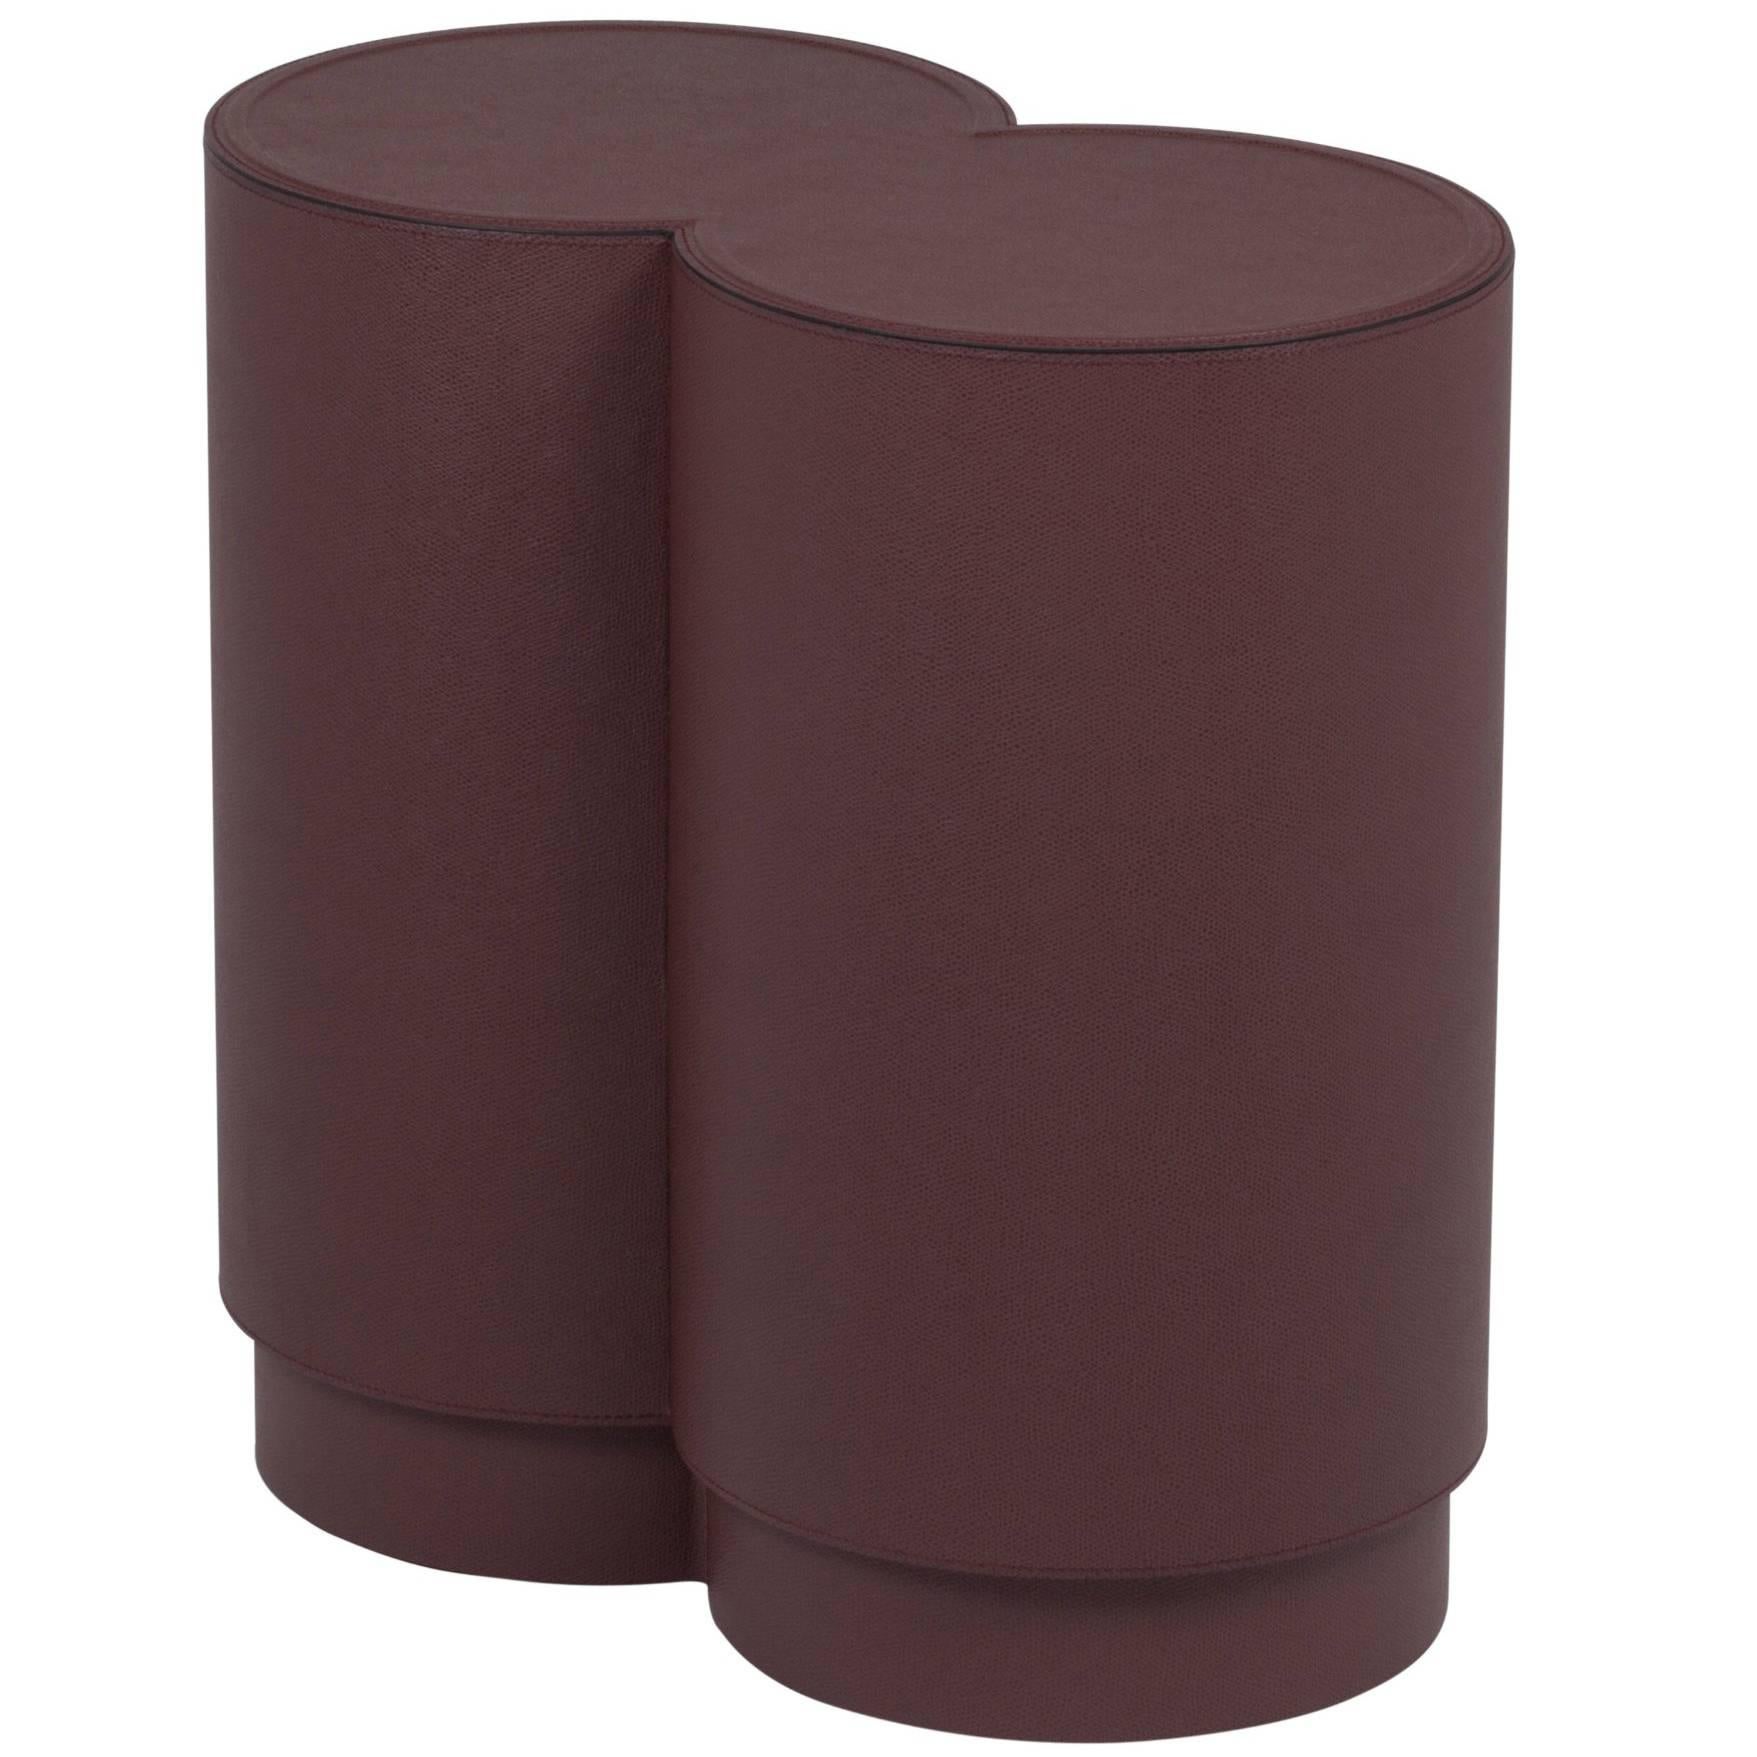 Binity Leather Stool Bordeaux Golf Leather For Sale